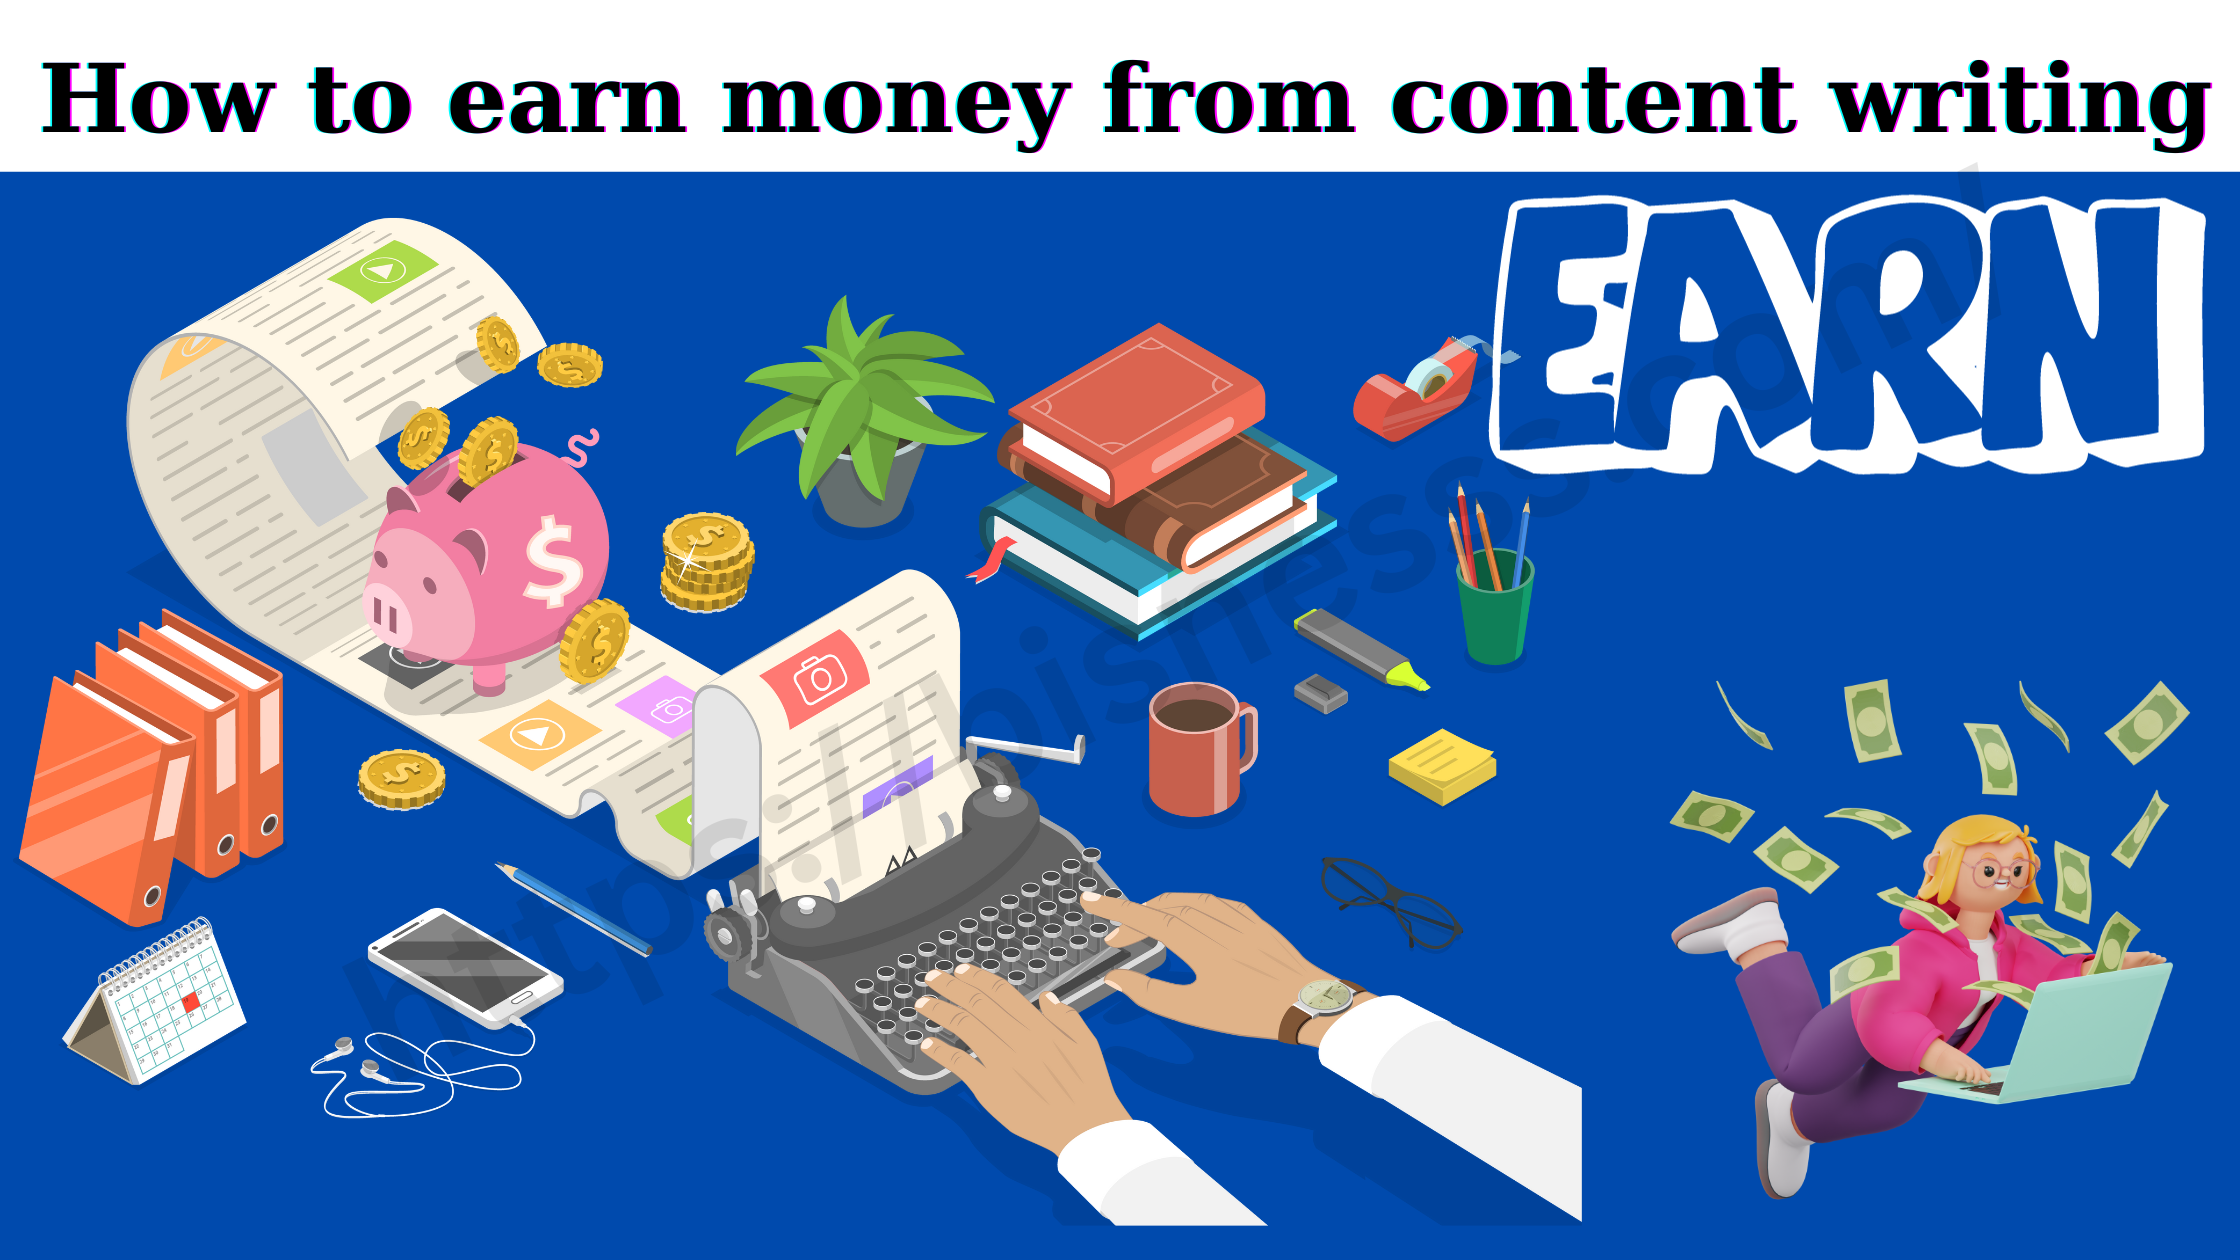 How to earn money from content writing